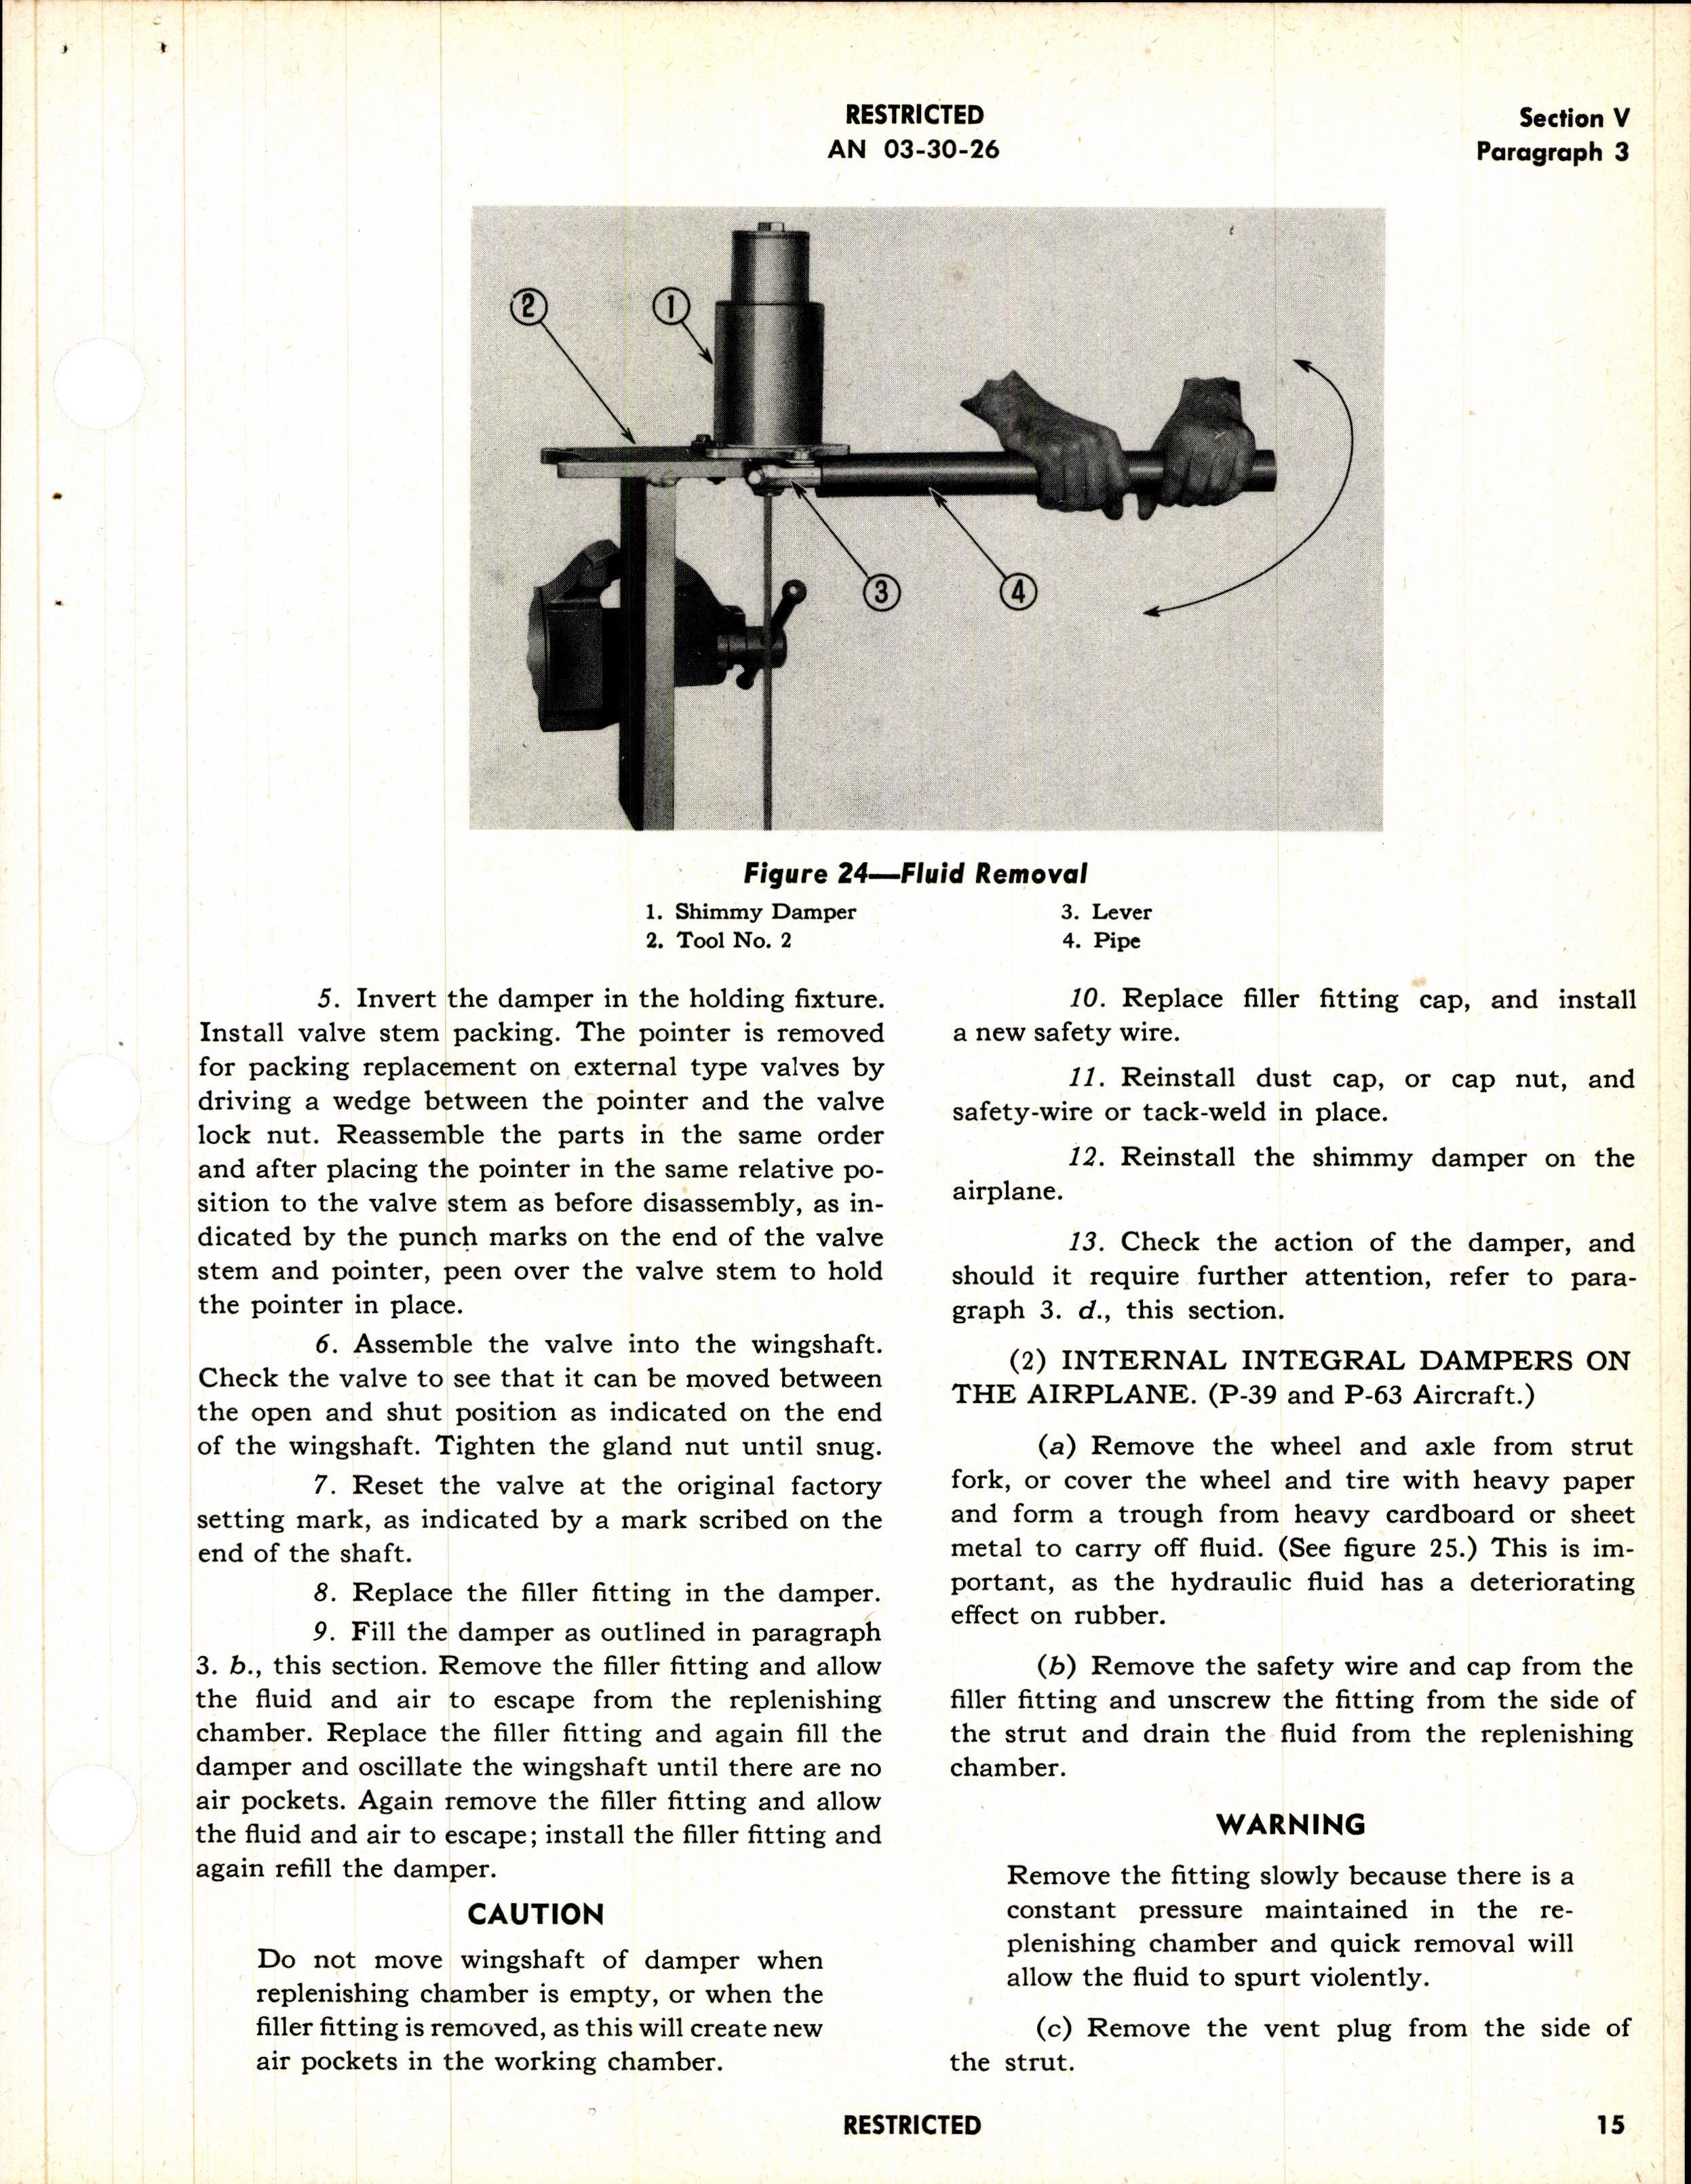 Sample page 43 from AirCorps Library document: Operation, Service, and Overhaul Instructions with Parts Catalog for Shimmy Dampers